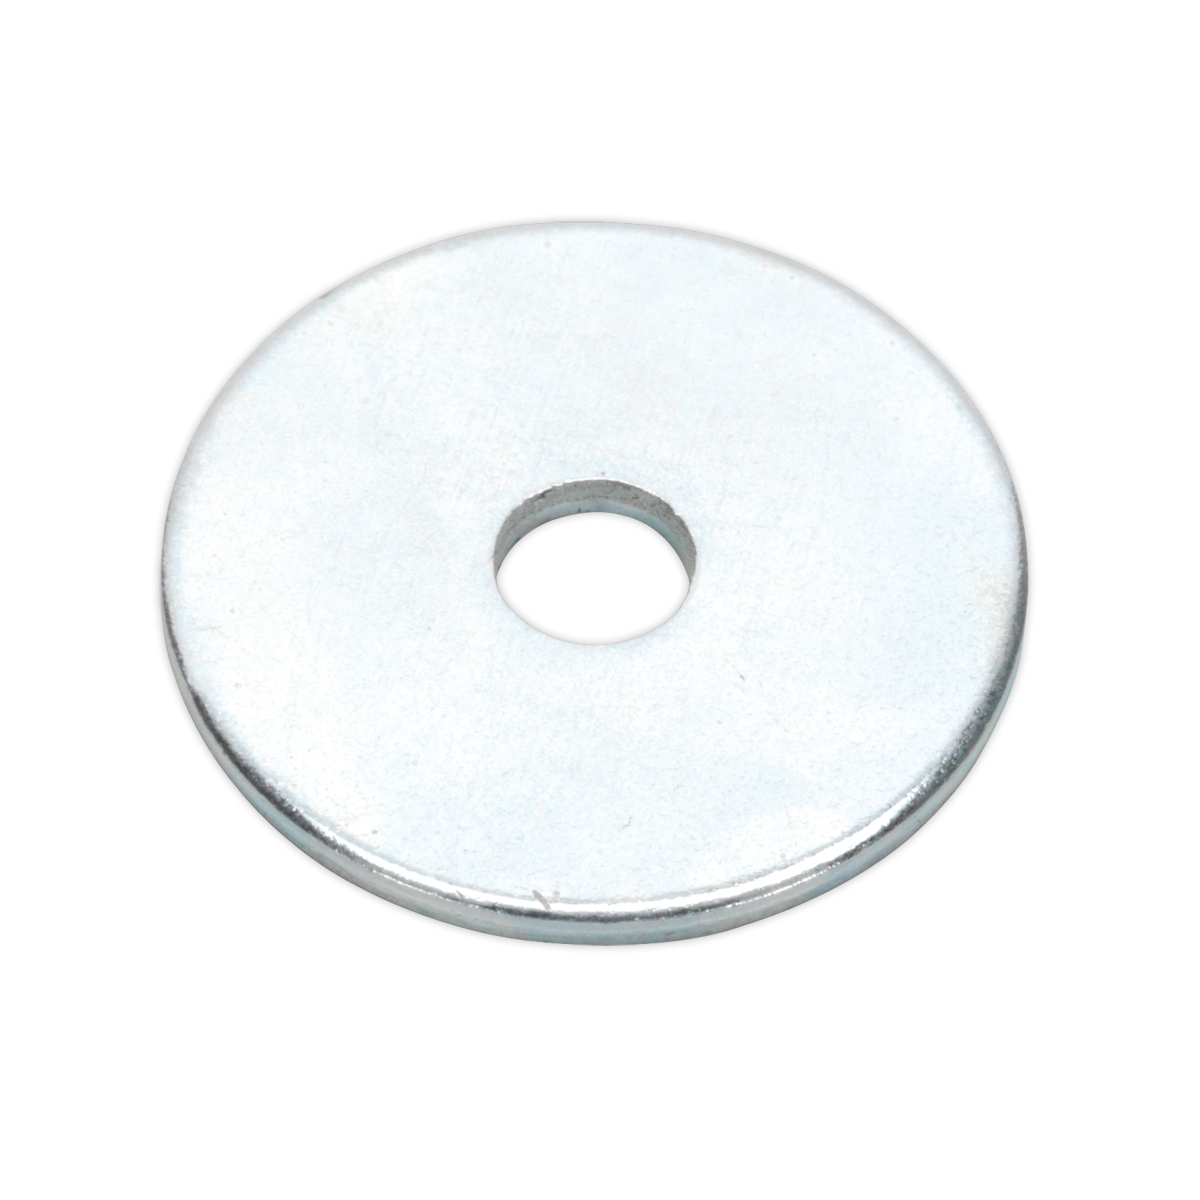 Repair Washer M5 x 19mm Zinc Plated Pack of 100 - RW519 - Farming Parts